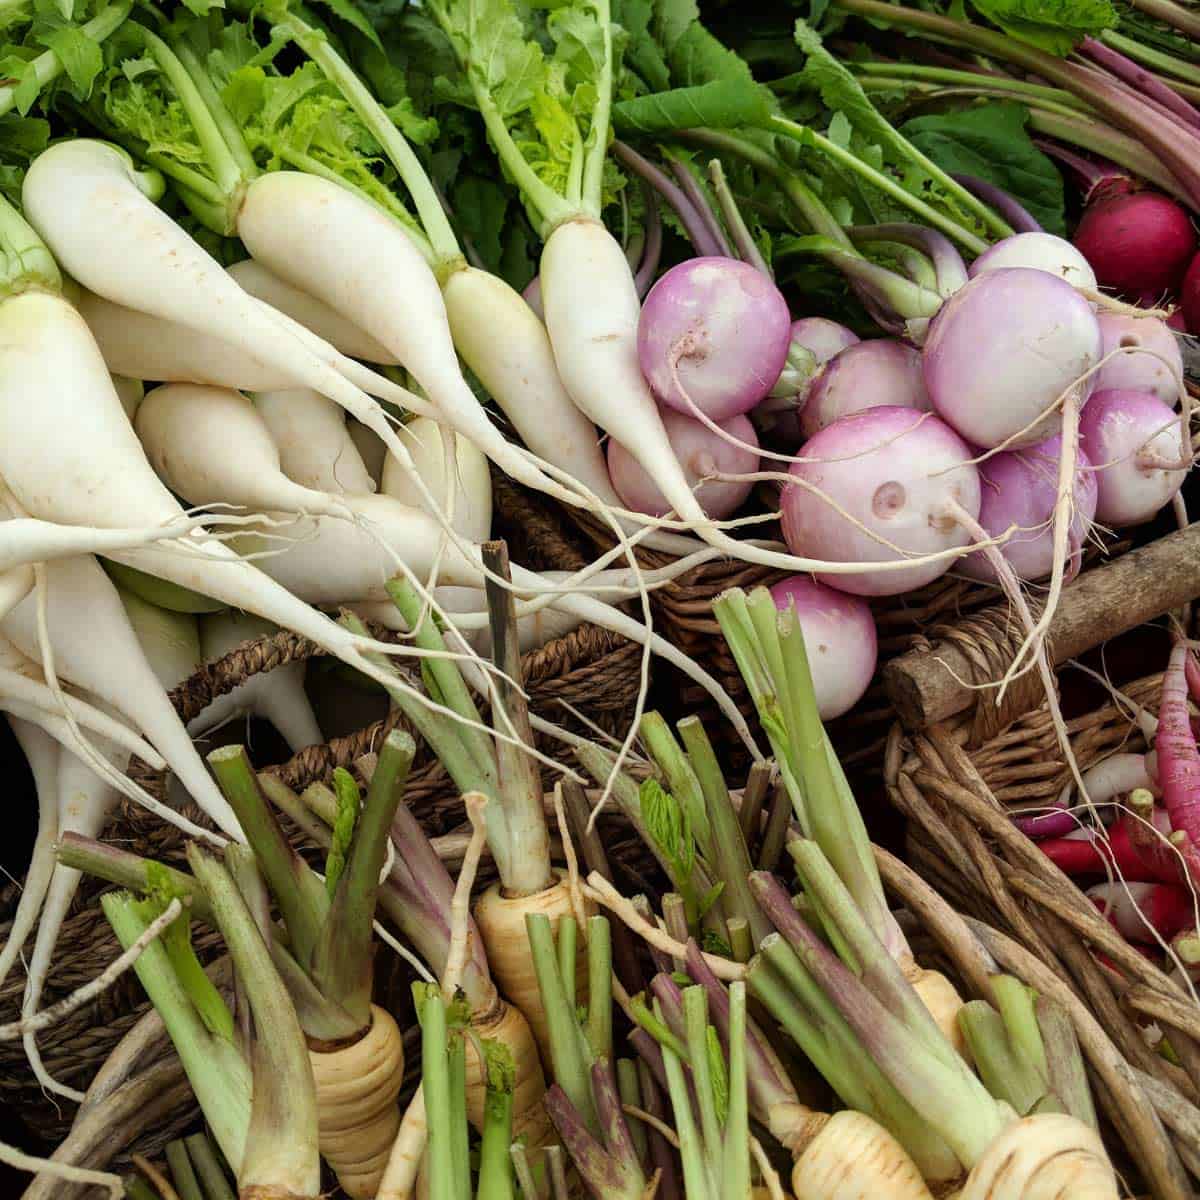 Different types of radishes in a basket.